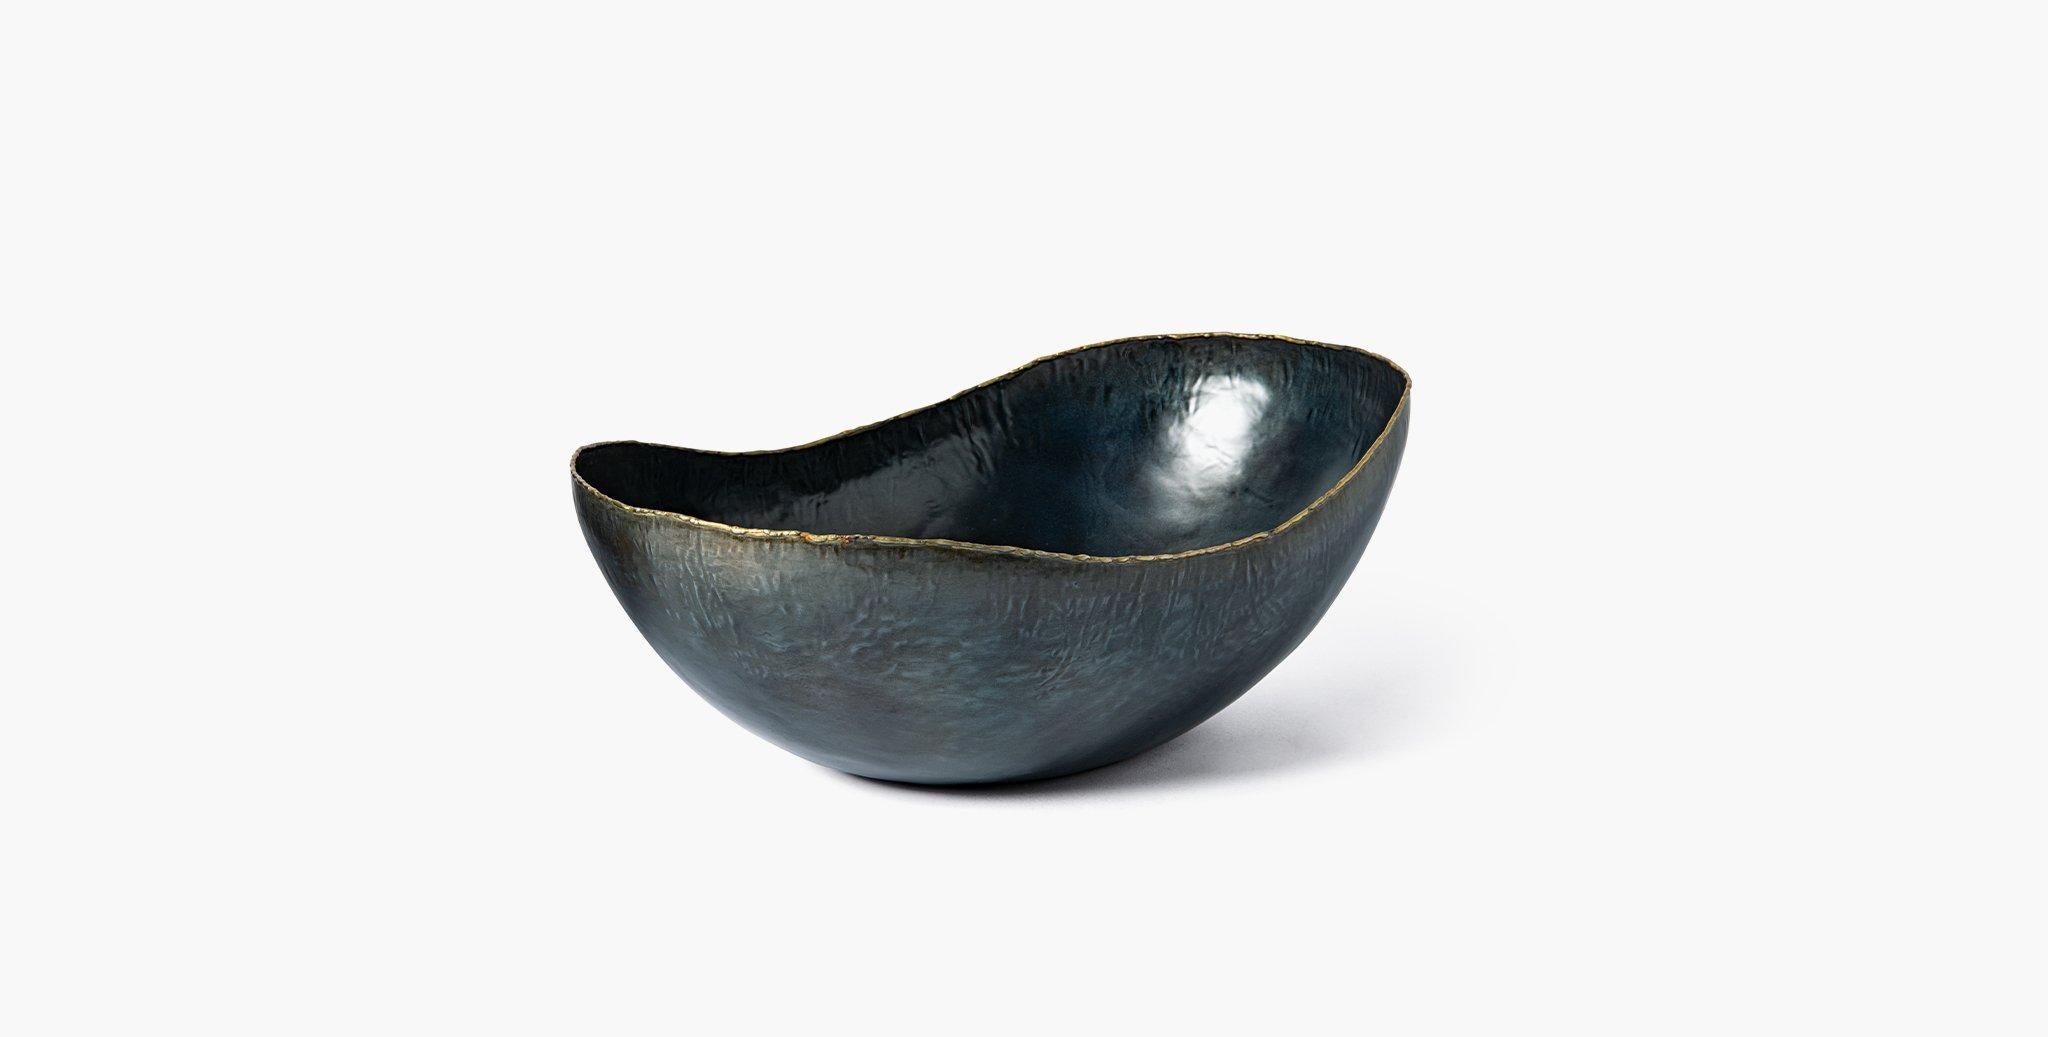 Our Vernon Bowls feature organic curves in ebonized iron with subtle metal detailing to highlight its serpentine edge. Our handcrafted fabrics, leathers, and finishes are inspired by the natural variations within fibers, textures, and weaves. Each